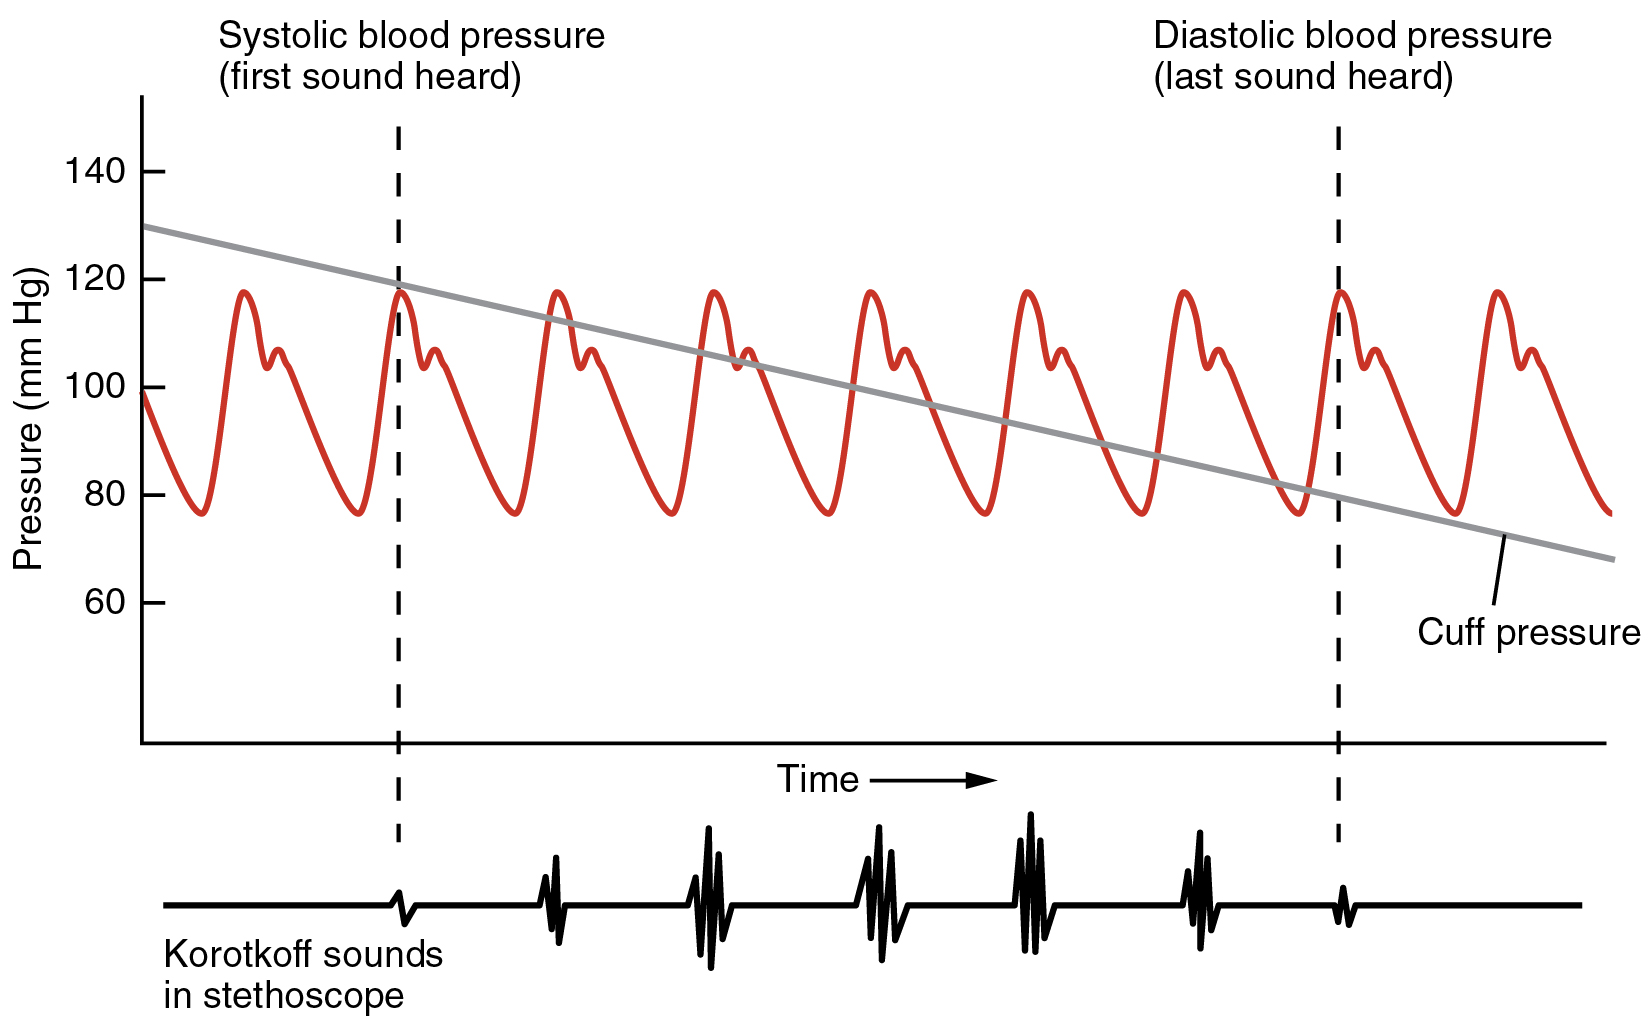 This image shows blood pressure as a function of time.